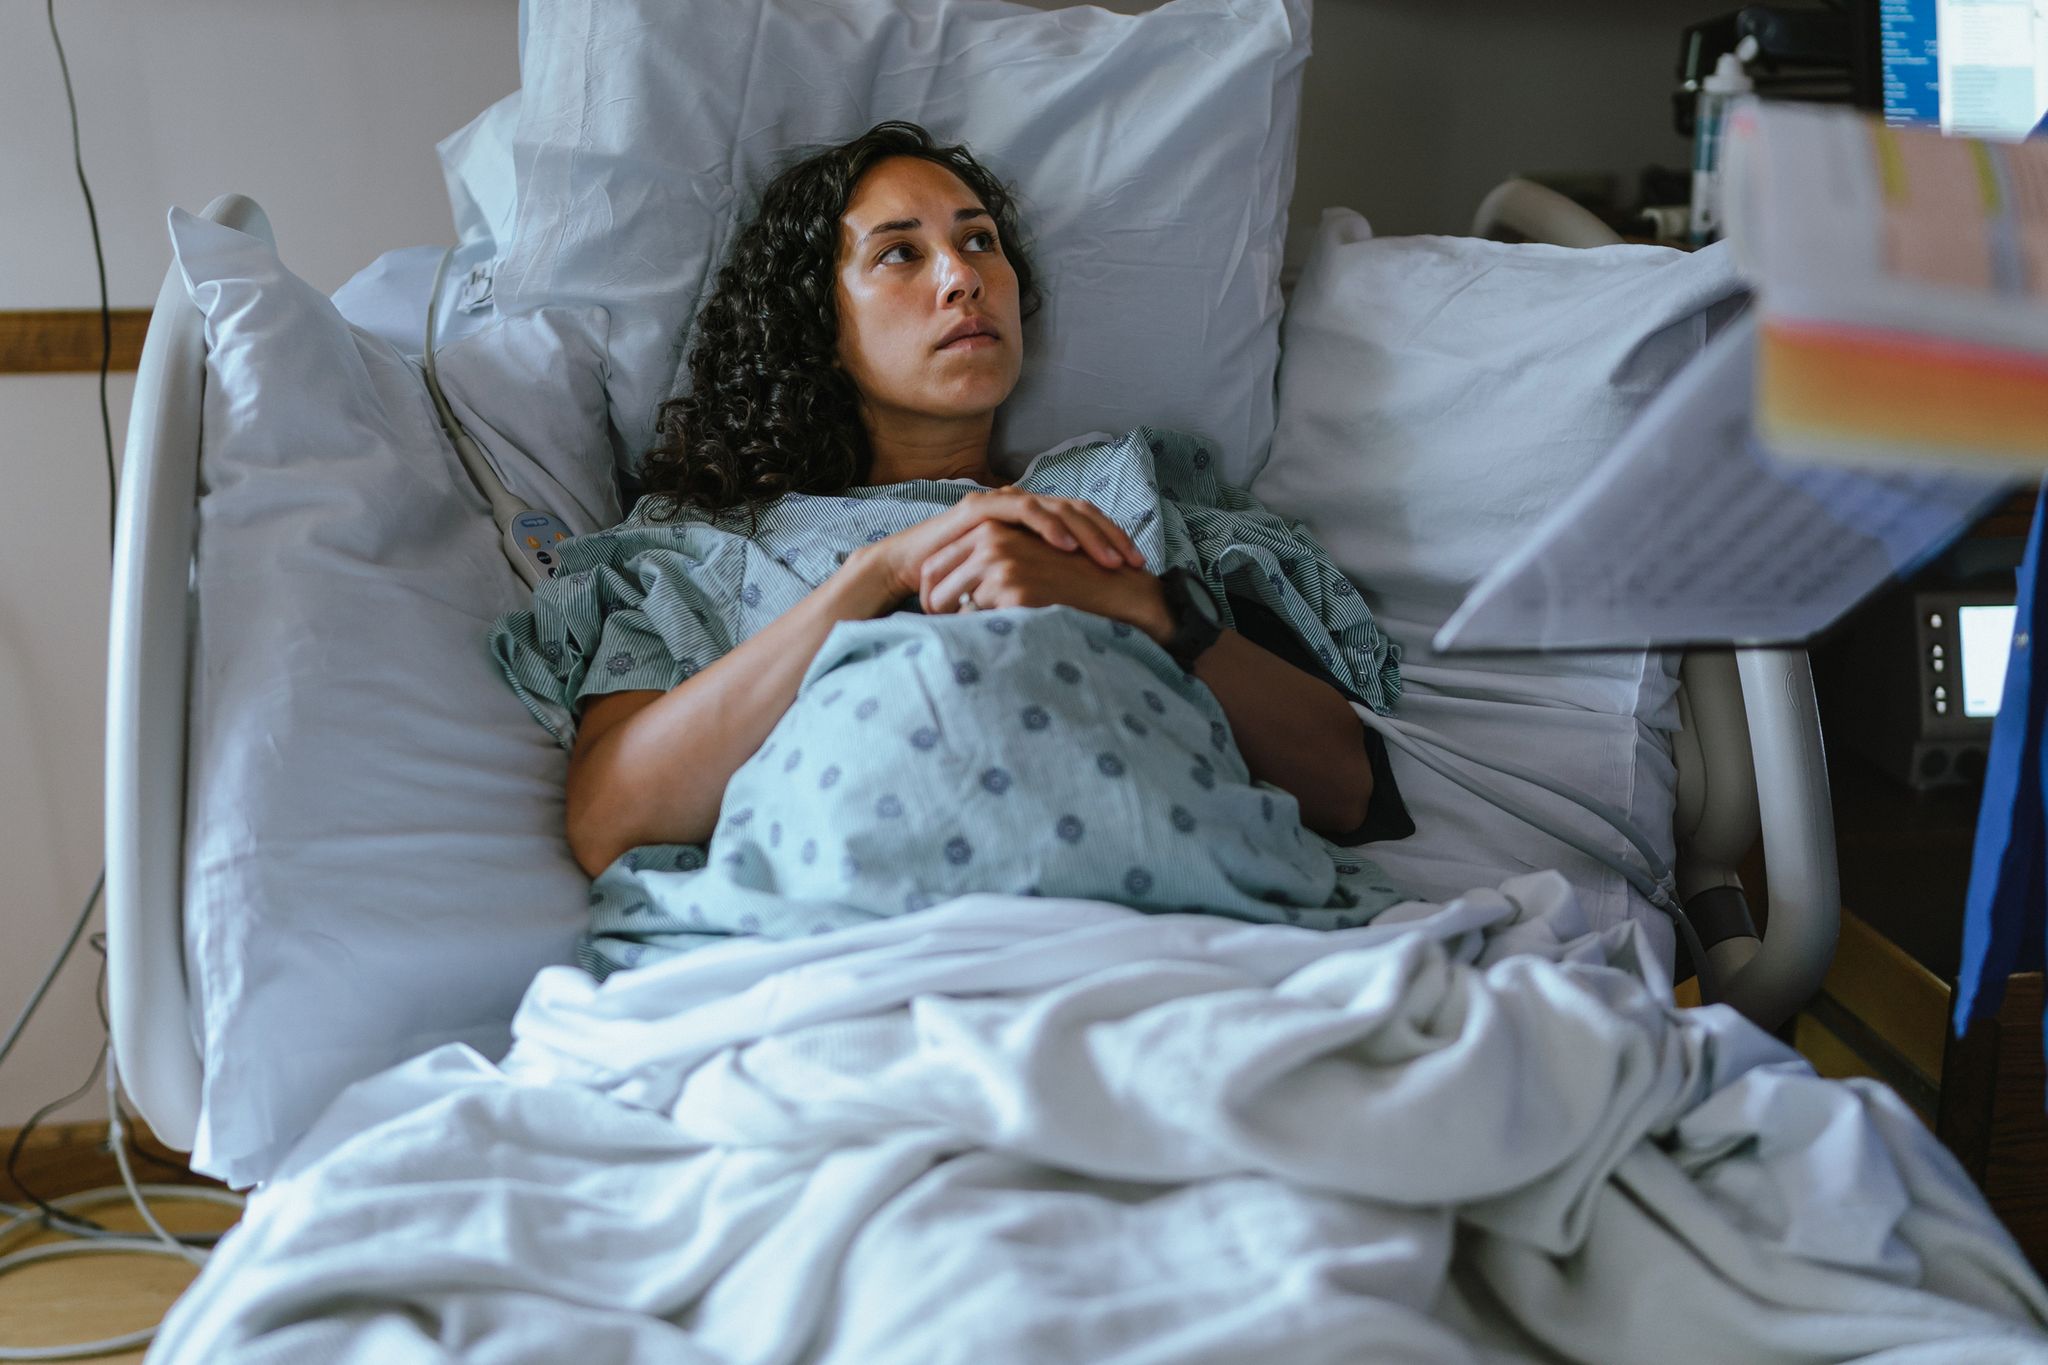 a pregnant woman lies in a hospital bed and speaks with her doctor while in labor